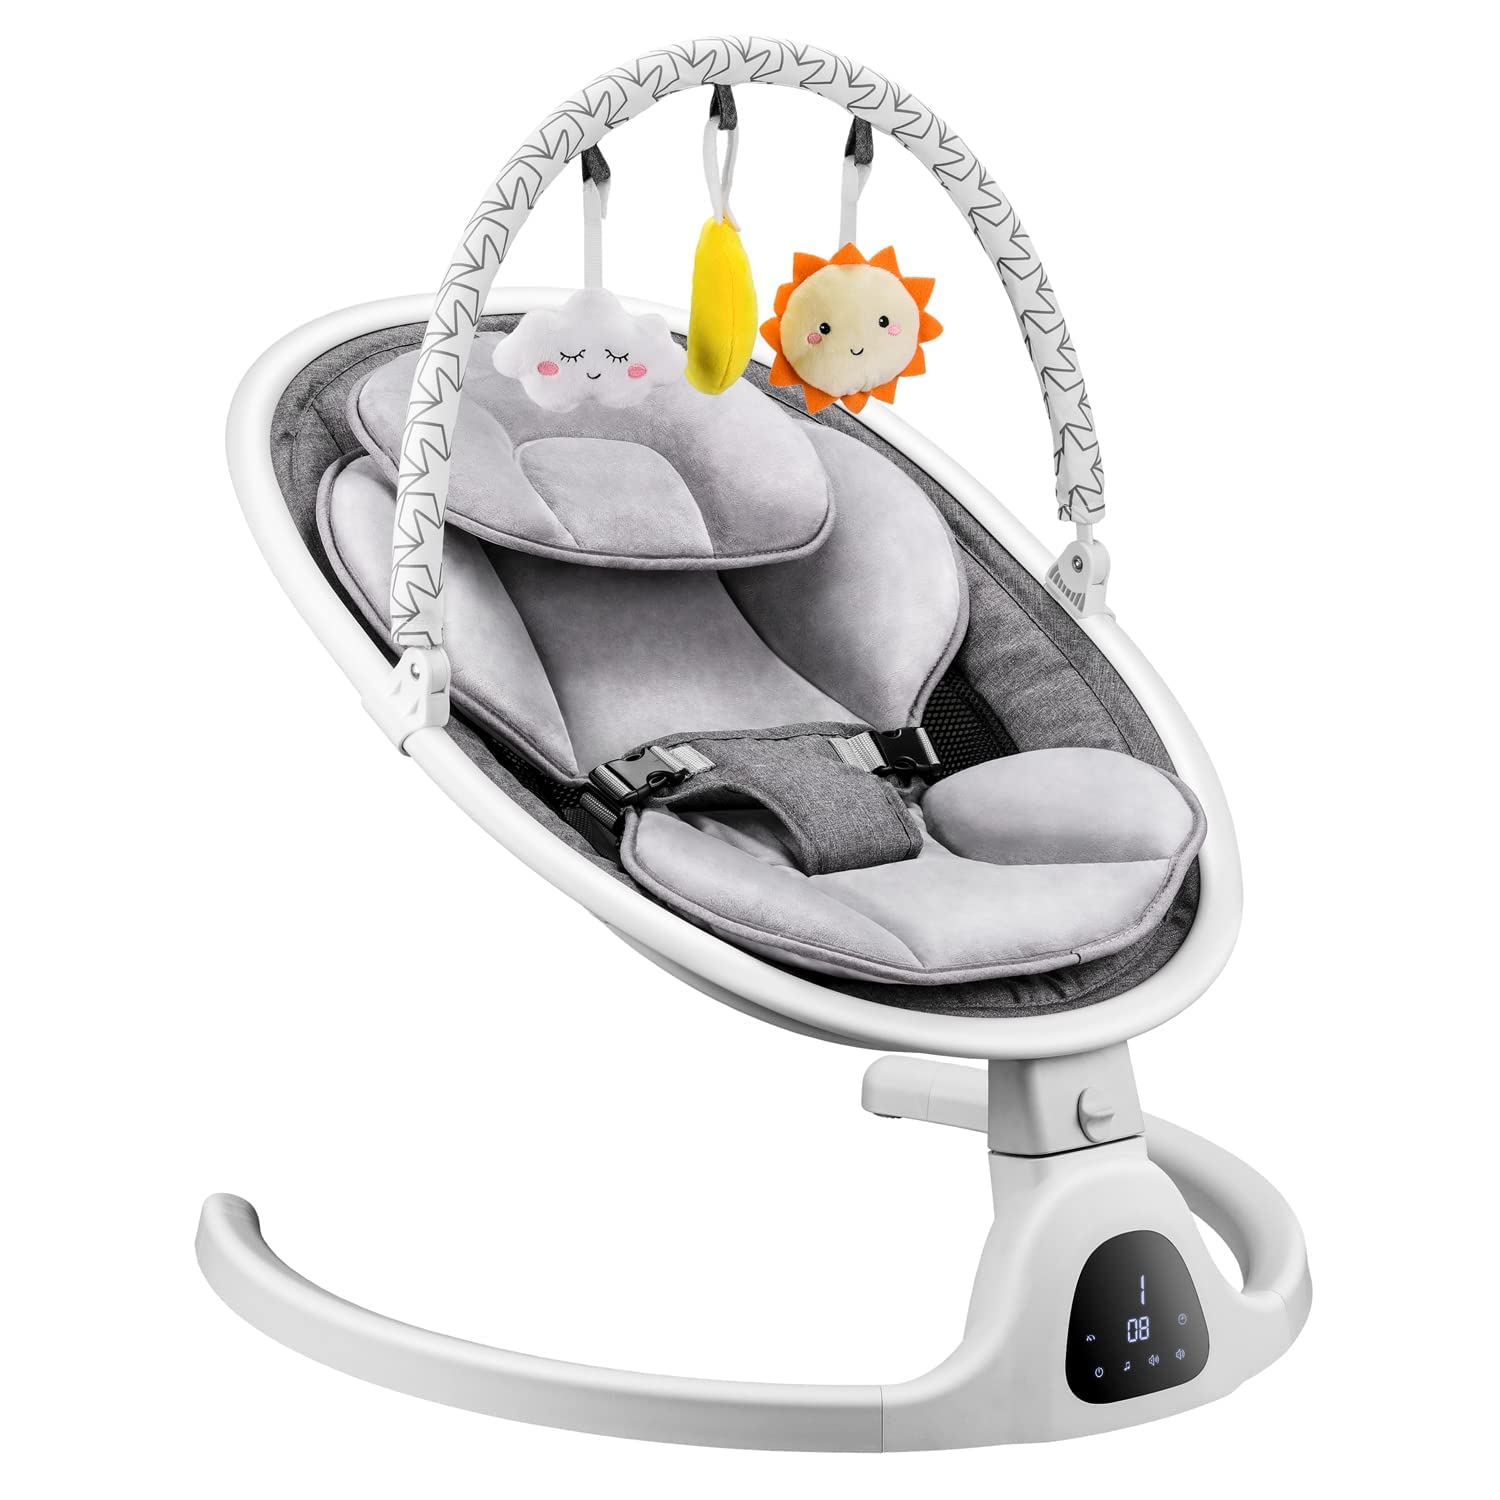 GOPANDA Baby Swings For Infants, Bluetooth Baby Bouncer With Built-In Lullabies And Timer Function, 5 Swing Options Baby Chair For Newbo